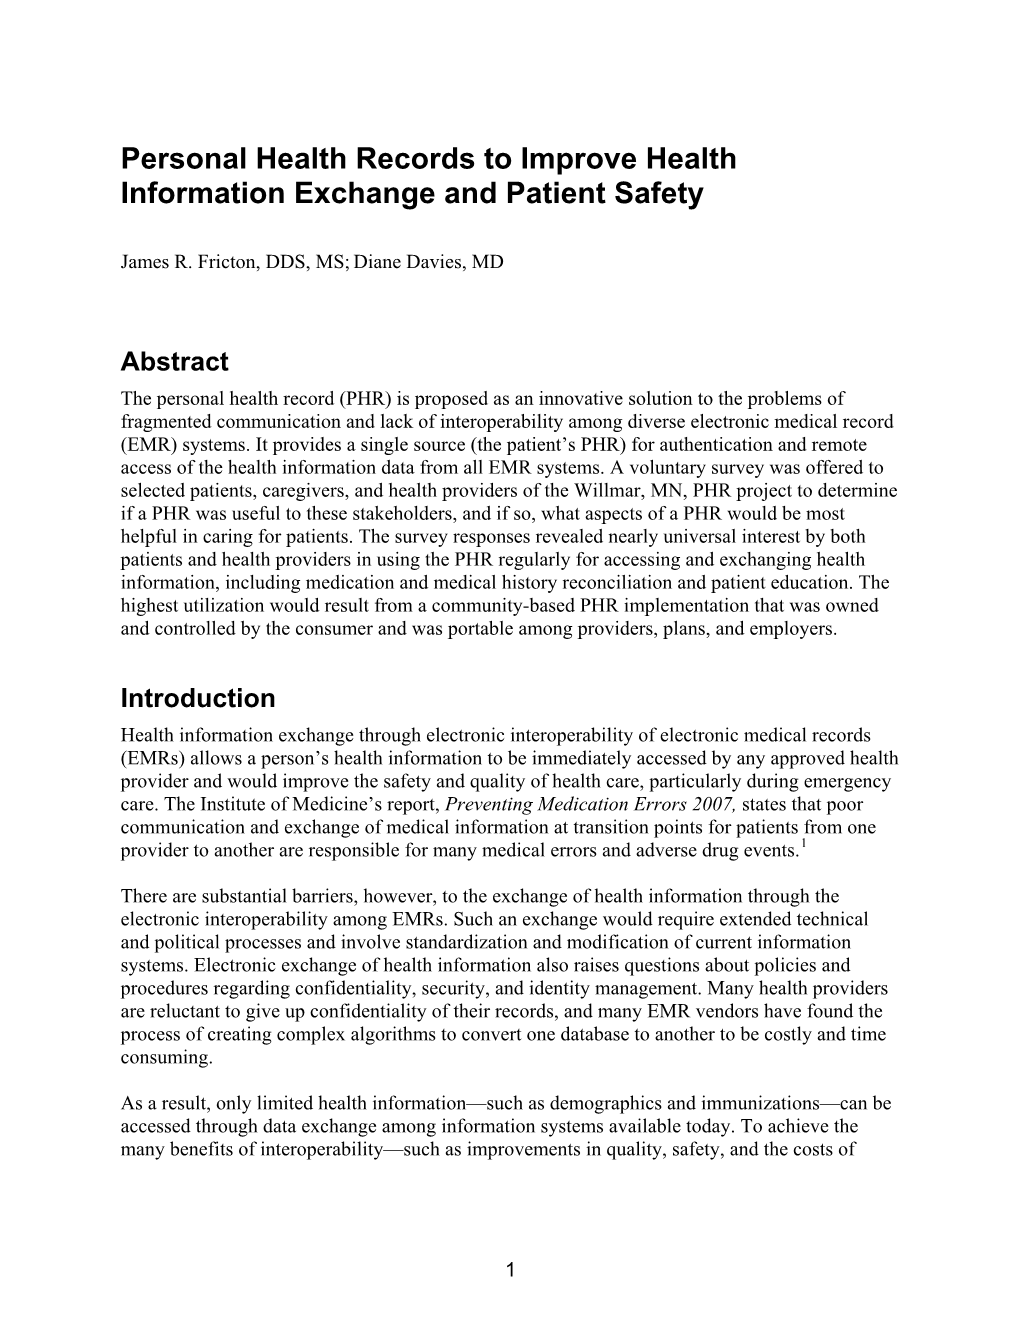 Personal Health Records to Improve Health Information Exchange and Patient Safety